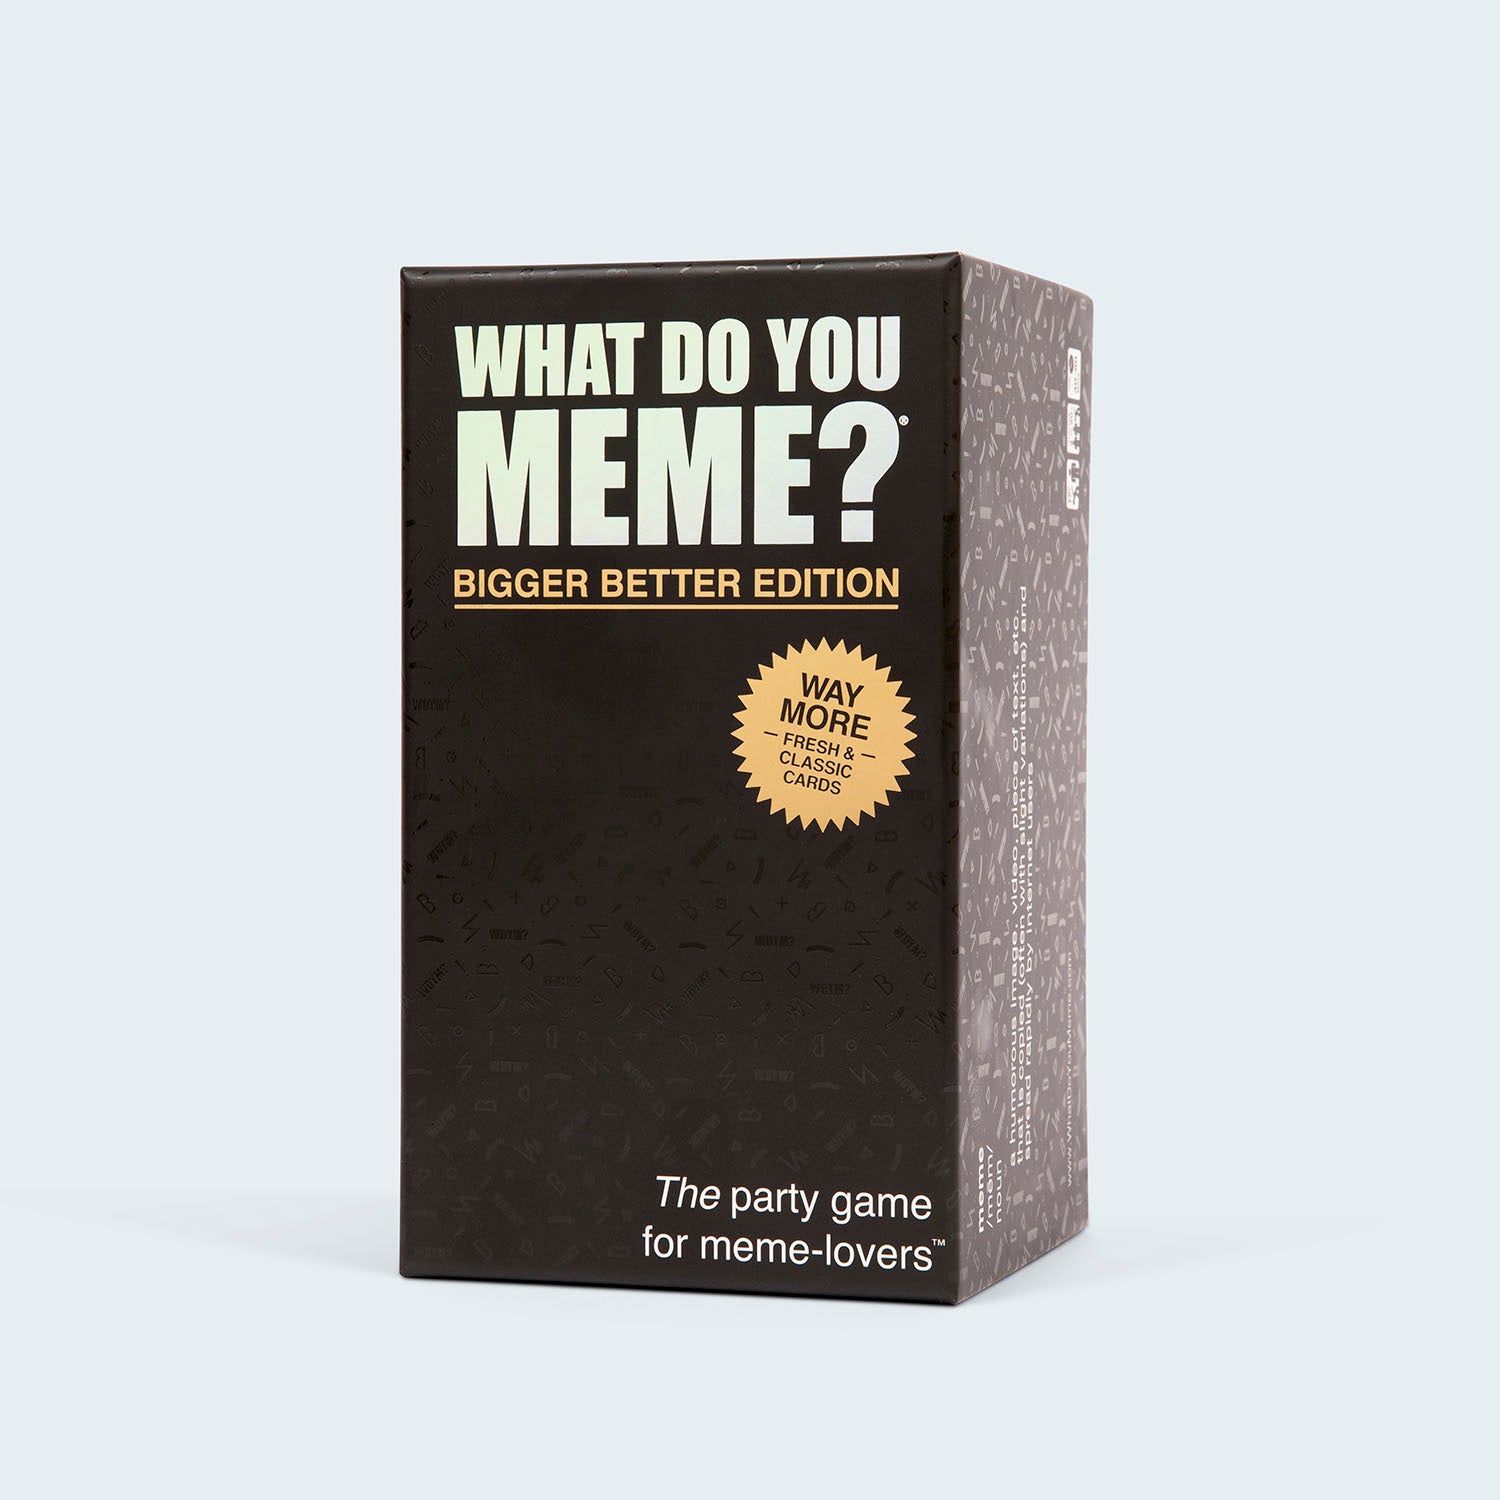 what-do-you-meme-bigger-better-edition-game-box-and-game-play-03-what-do-you-meme-by-relatable